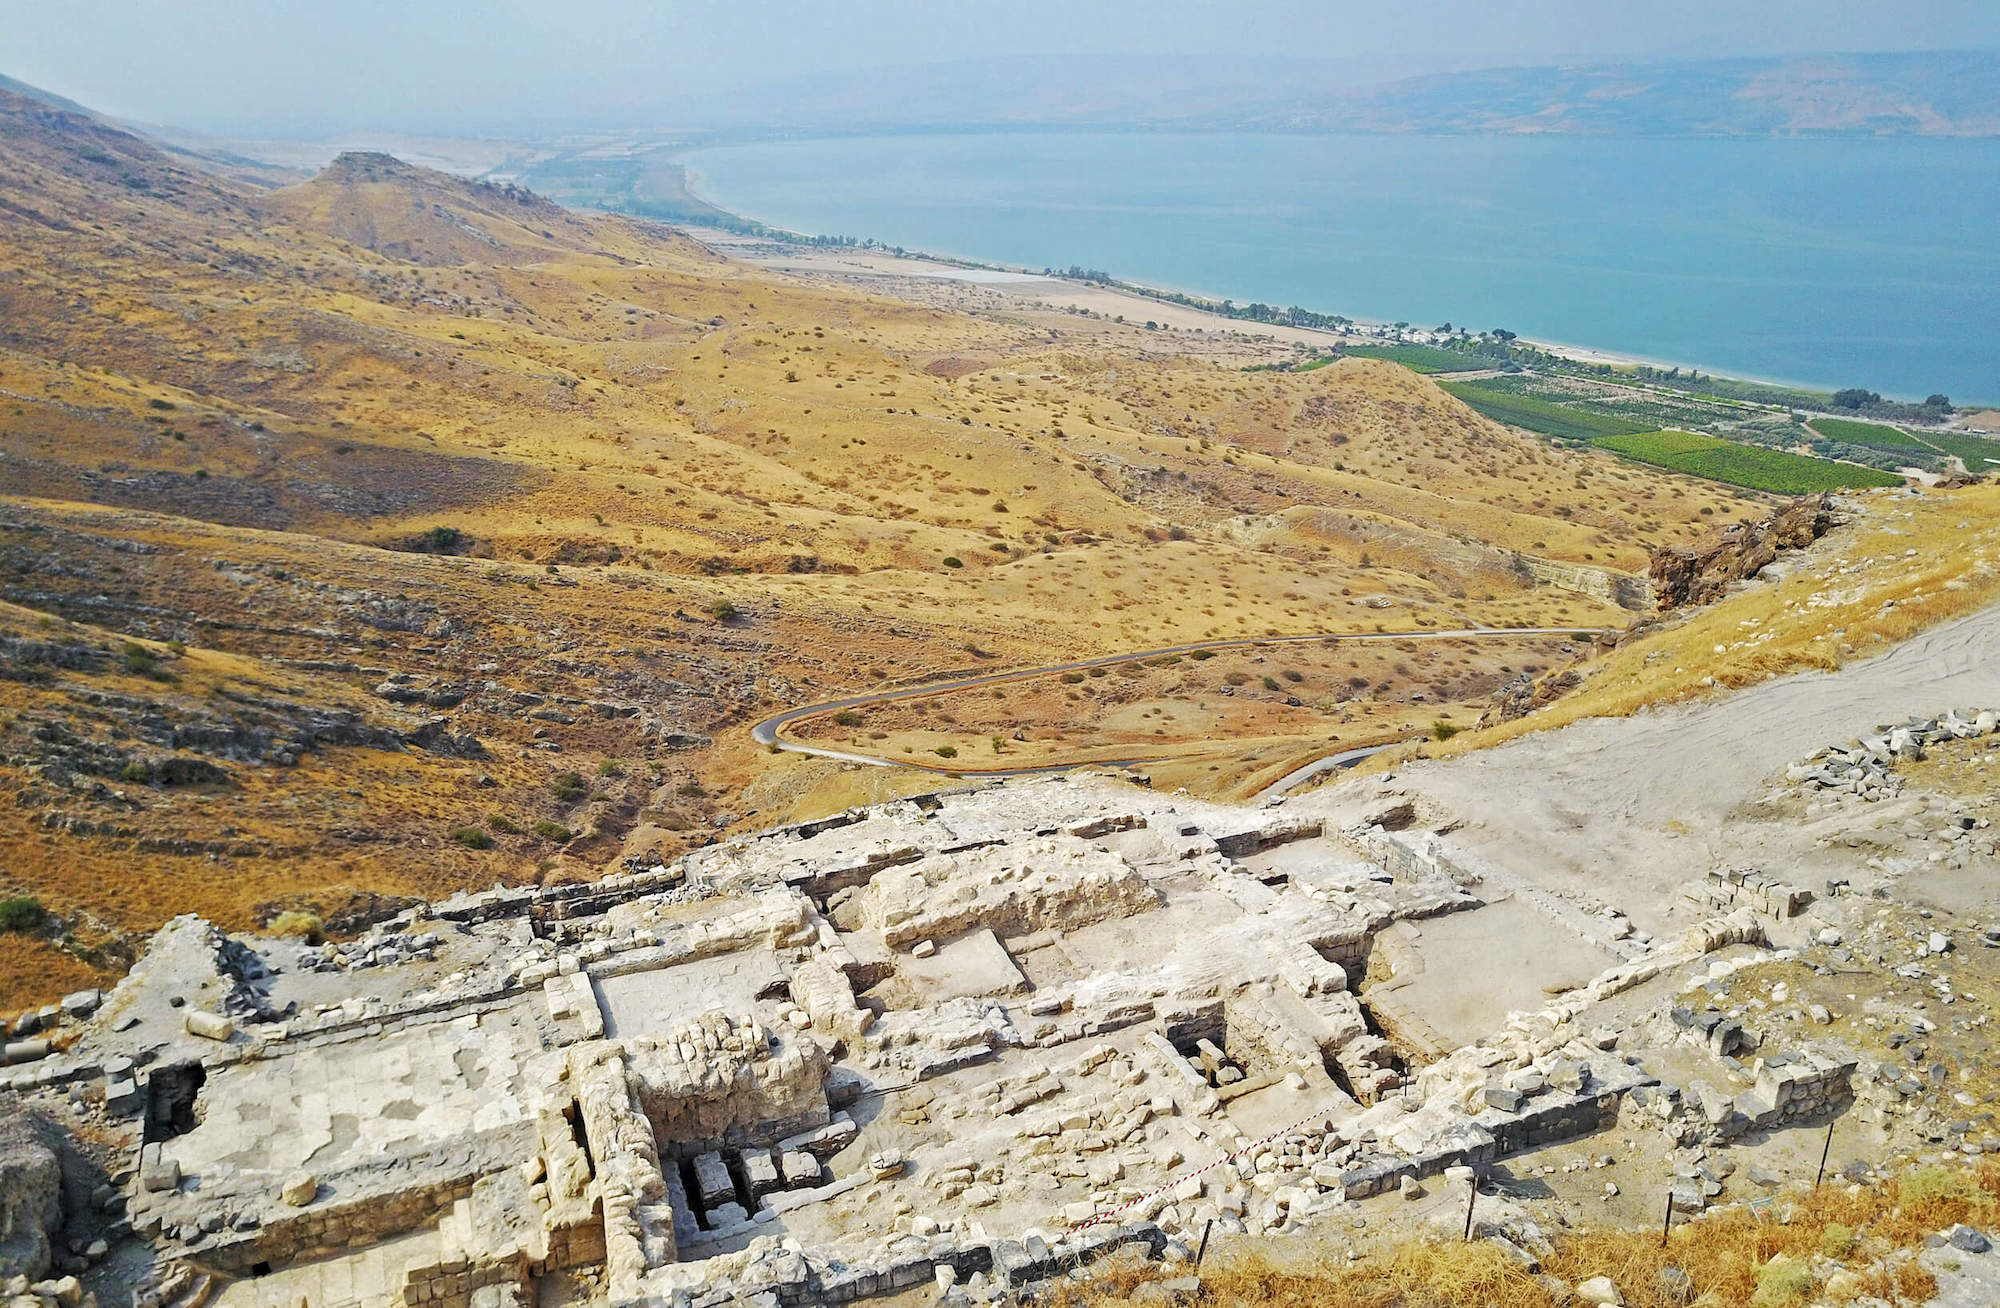 Fig. 1: The ruins of the 2nd to 4th century CE Southern Bathhouse at Hippos and the view towards the Sea of Galilee (credit: Michael Eisenberg).